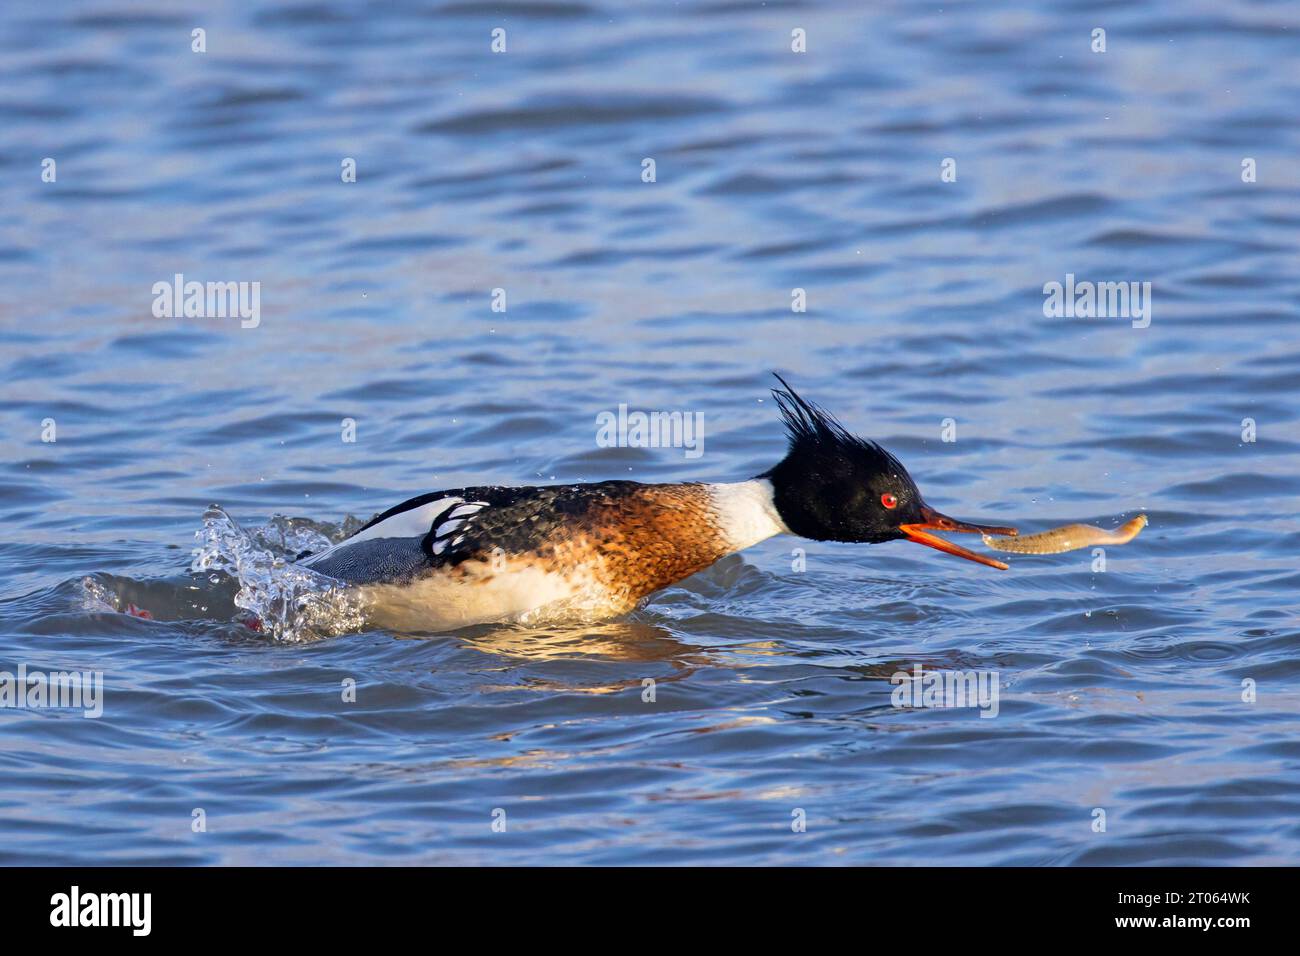 Red-breasted merganser (Mergus serrator) male swimming in sea and catching rock gunnel / butterfish (Pholis gunnellus) fish prey in winter Stock Photo